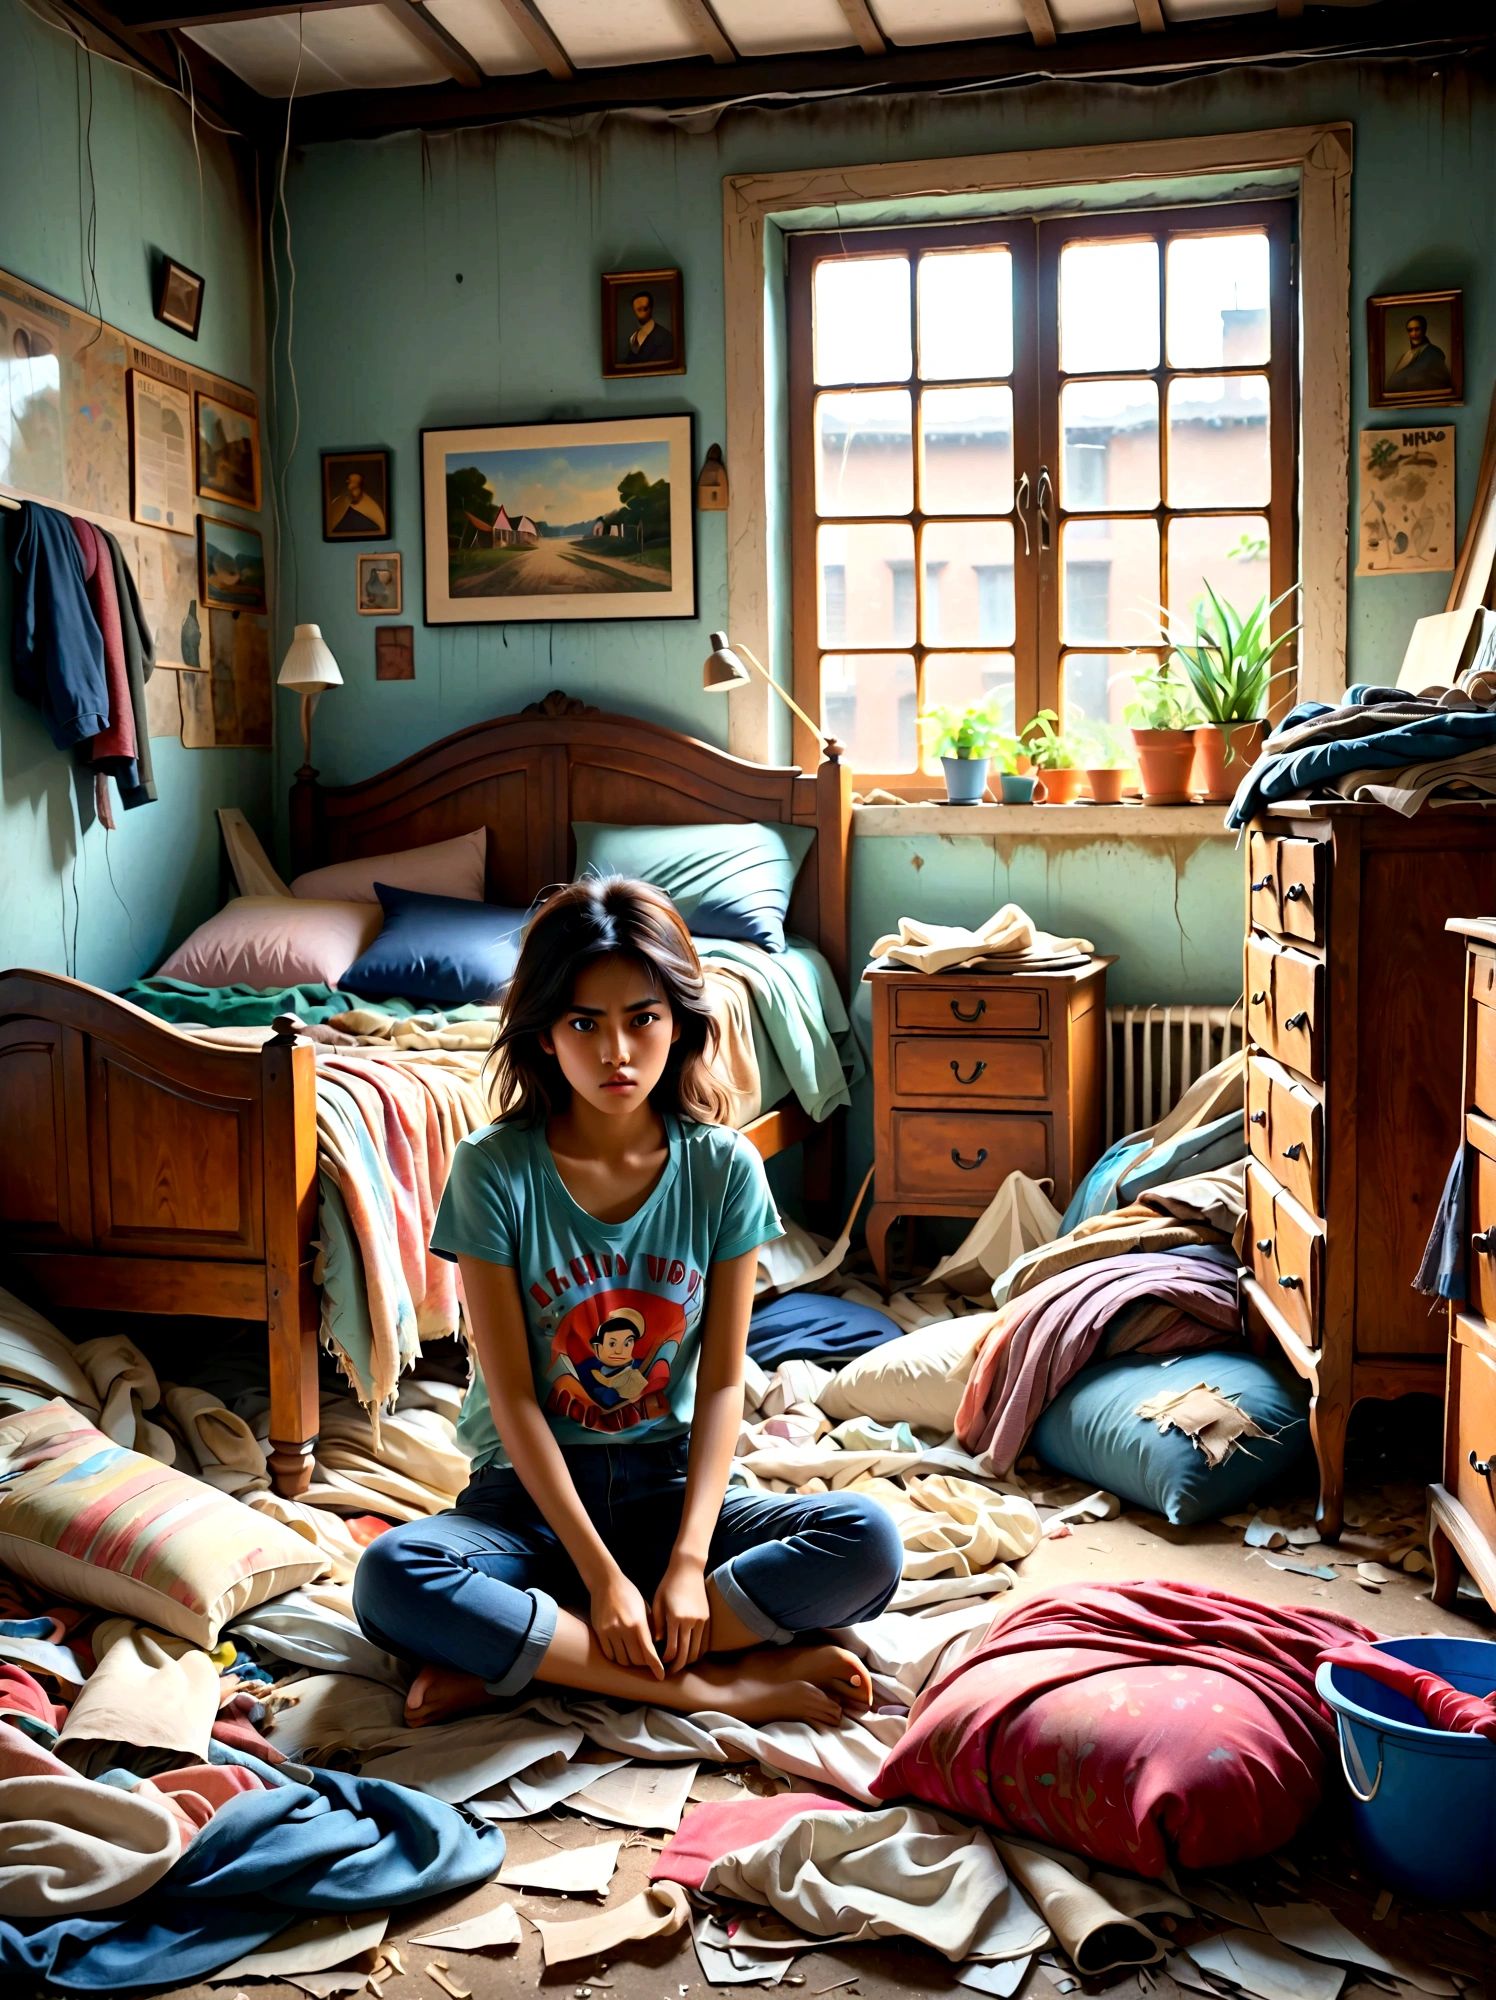 (a young girl with a disgusted expression:1.5), (Disgusted look:1.5), Long eyelashes, Messy hair, Sweating, Cleaning a Messy Room, dust, cobwebs, A bunch of clothes, Unmade bed, garbage on the floor, Realistic details, Realistic shadows, Realistic lighting, Natural light, Super Fine, Sharp focus, Physically Based Rendering, Extremely detailed description, major, Vivid colors